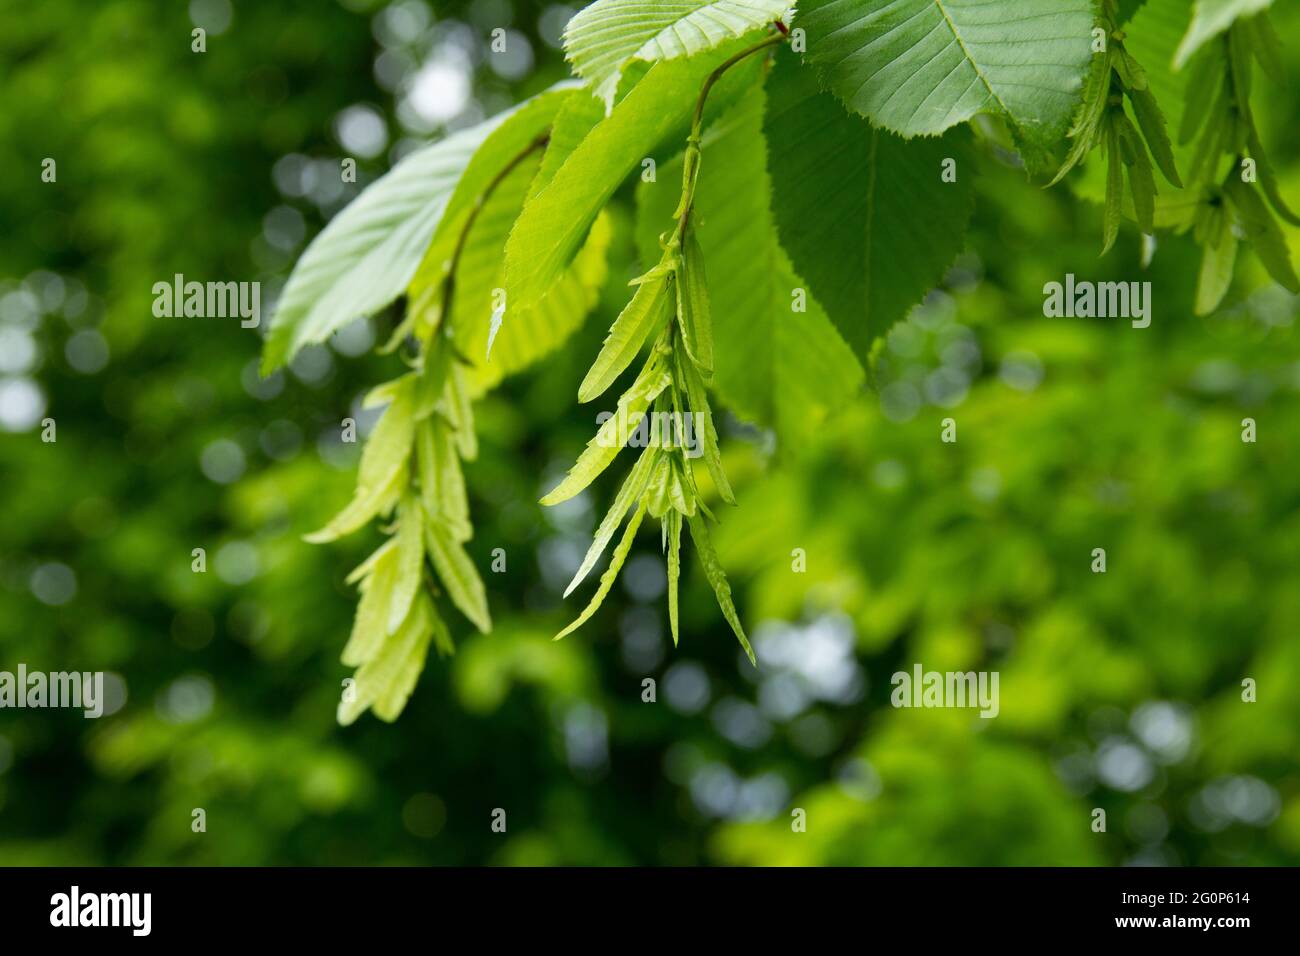 Hornbeam branch with young leaves and seeds on a blurred green background. Stock Photo